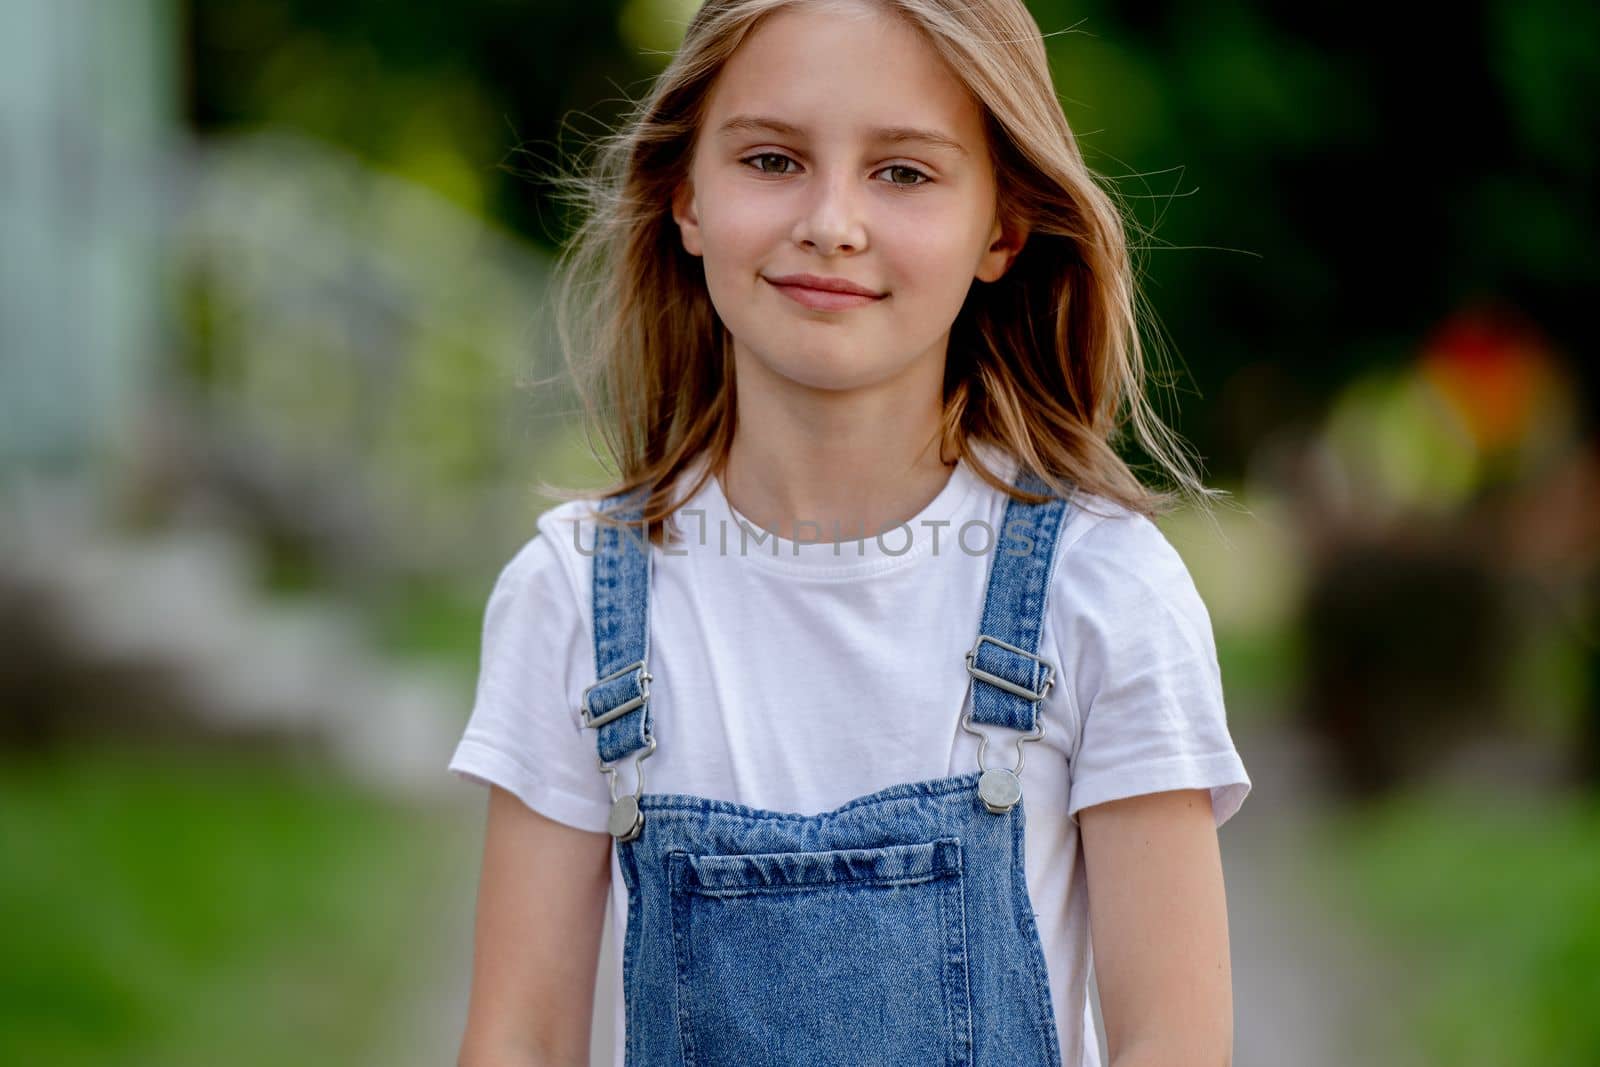 Beautiful preteen girl in city in summertime closeup portrait. Pretty female kid looking at camera in sunny day with blurred background